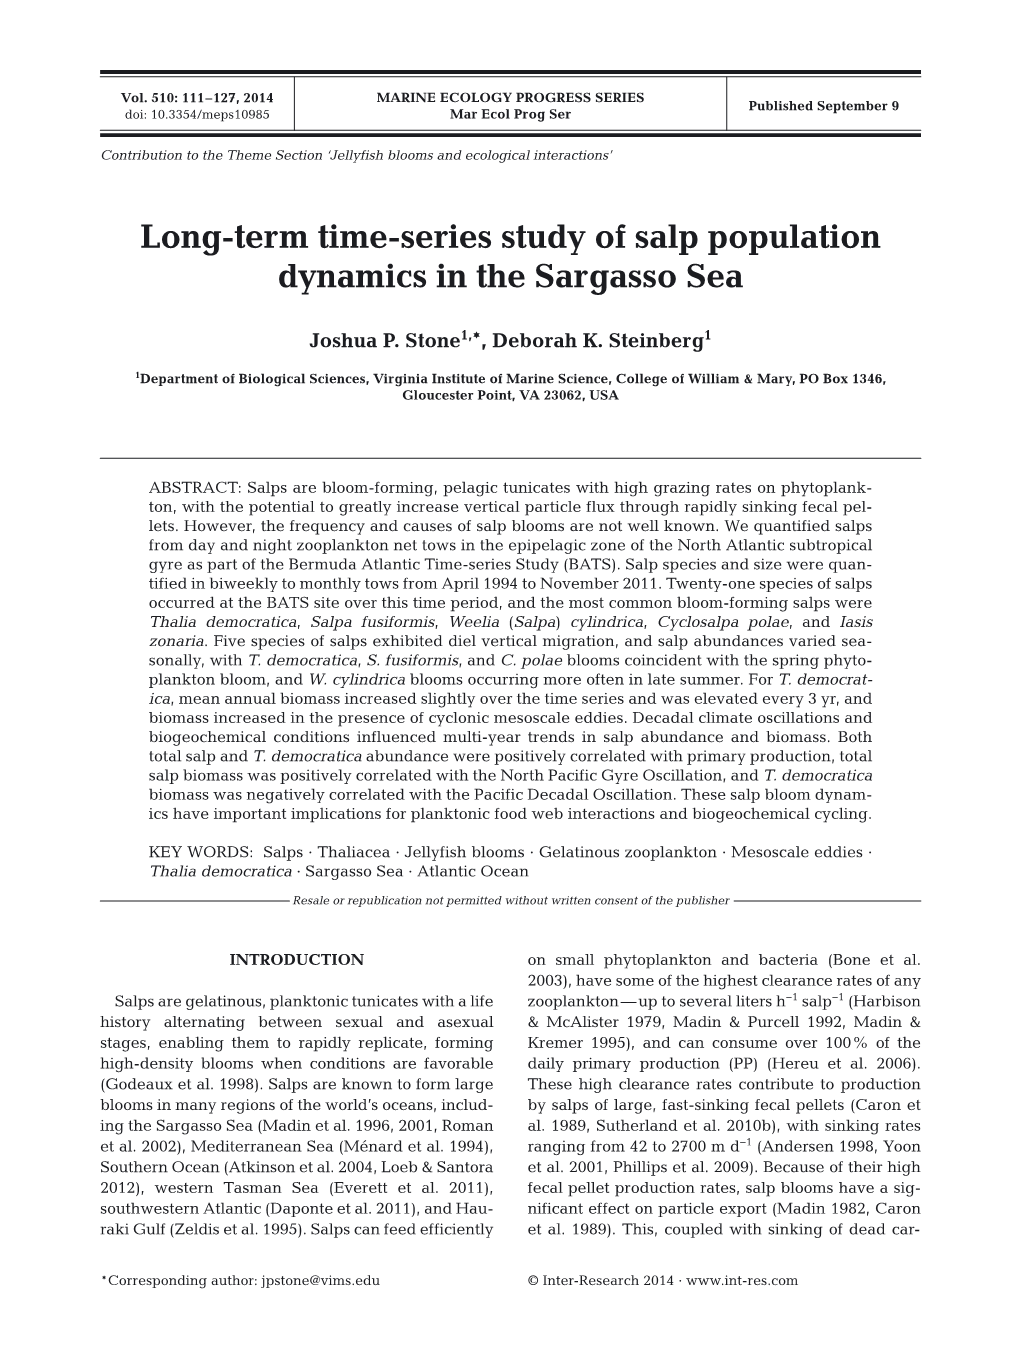 Long-Term Time-Series Study of Salp Population Dynamics in the Sargasso Sea